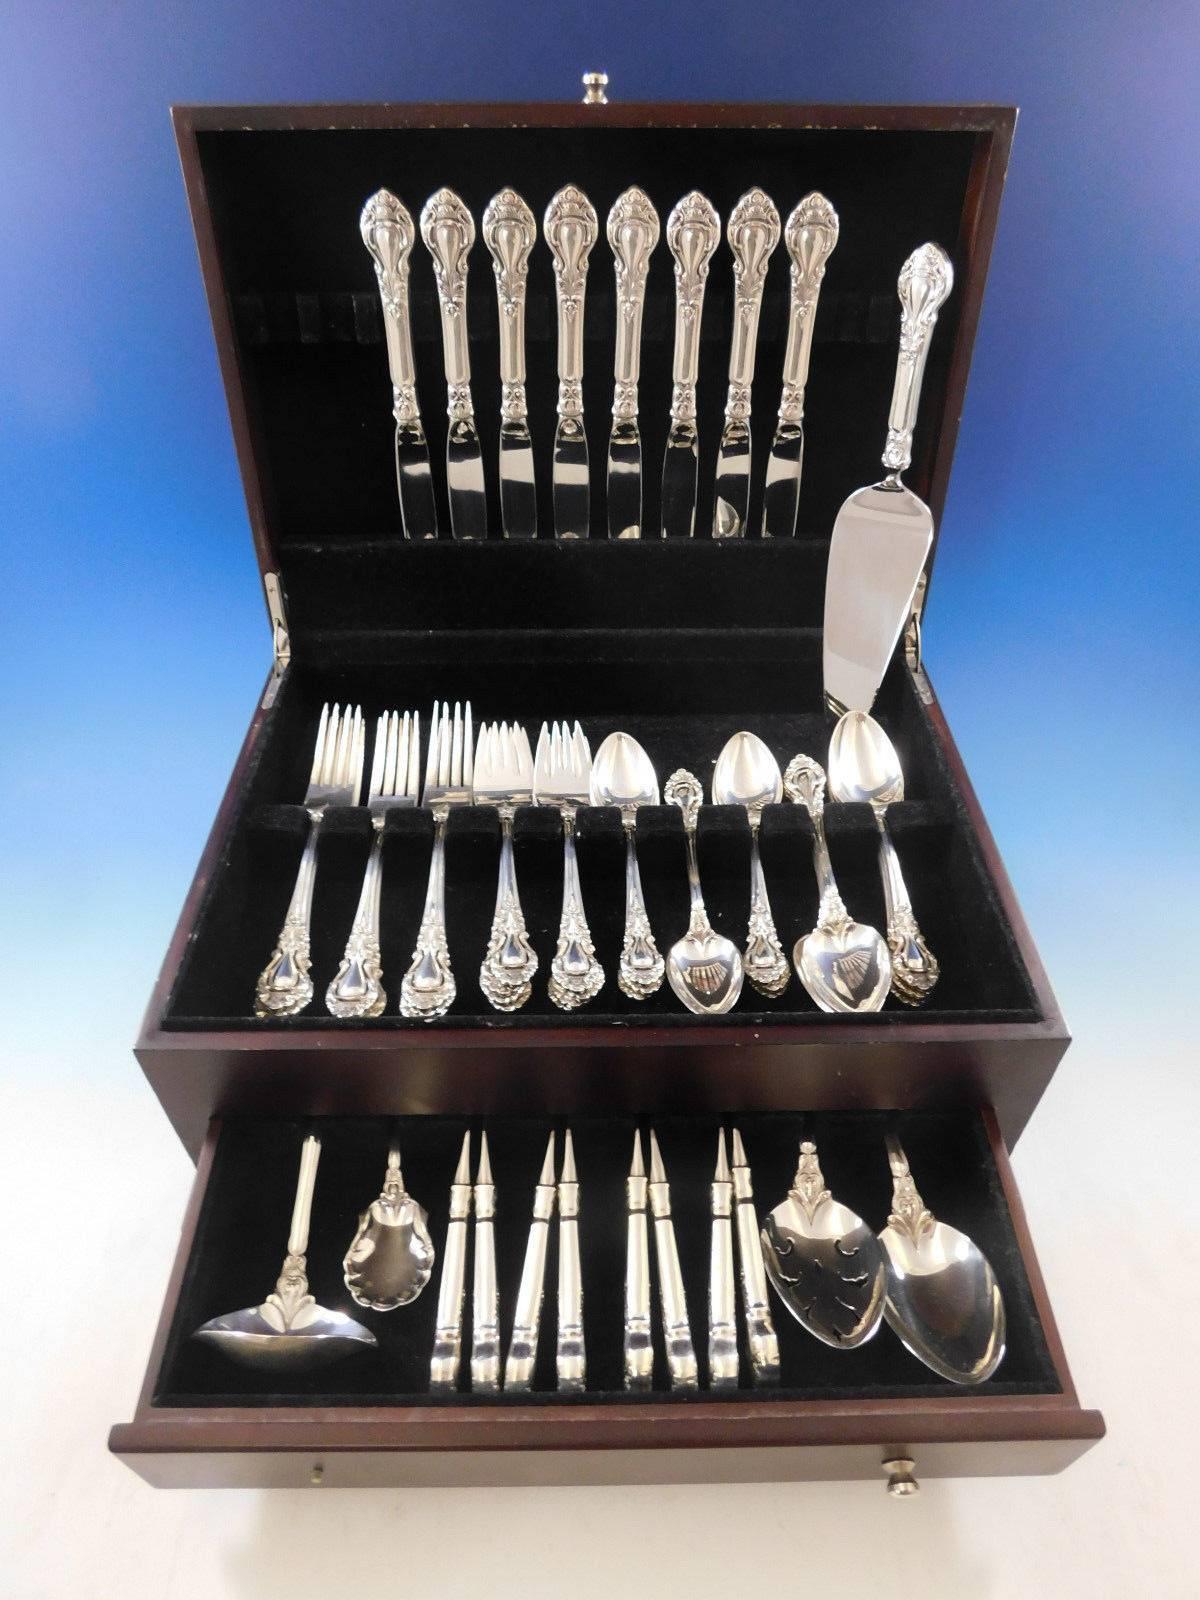 Exceptional Royal Dynasty by Stieff sterling silver flatware set, 53 pieces. This set includes:

8 Place Knives, 9 1/8